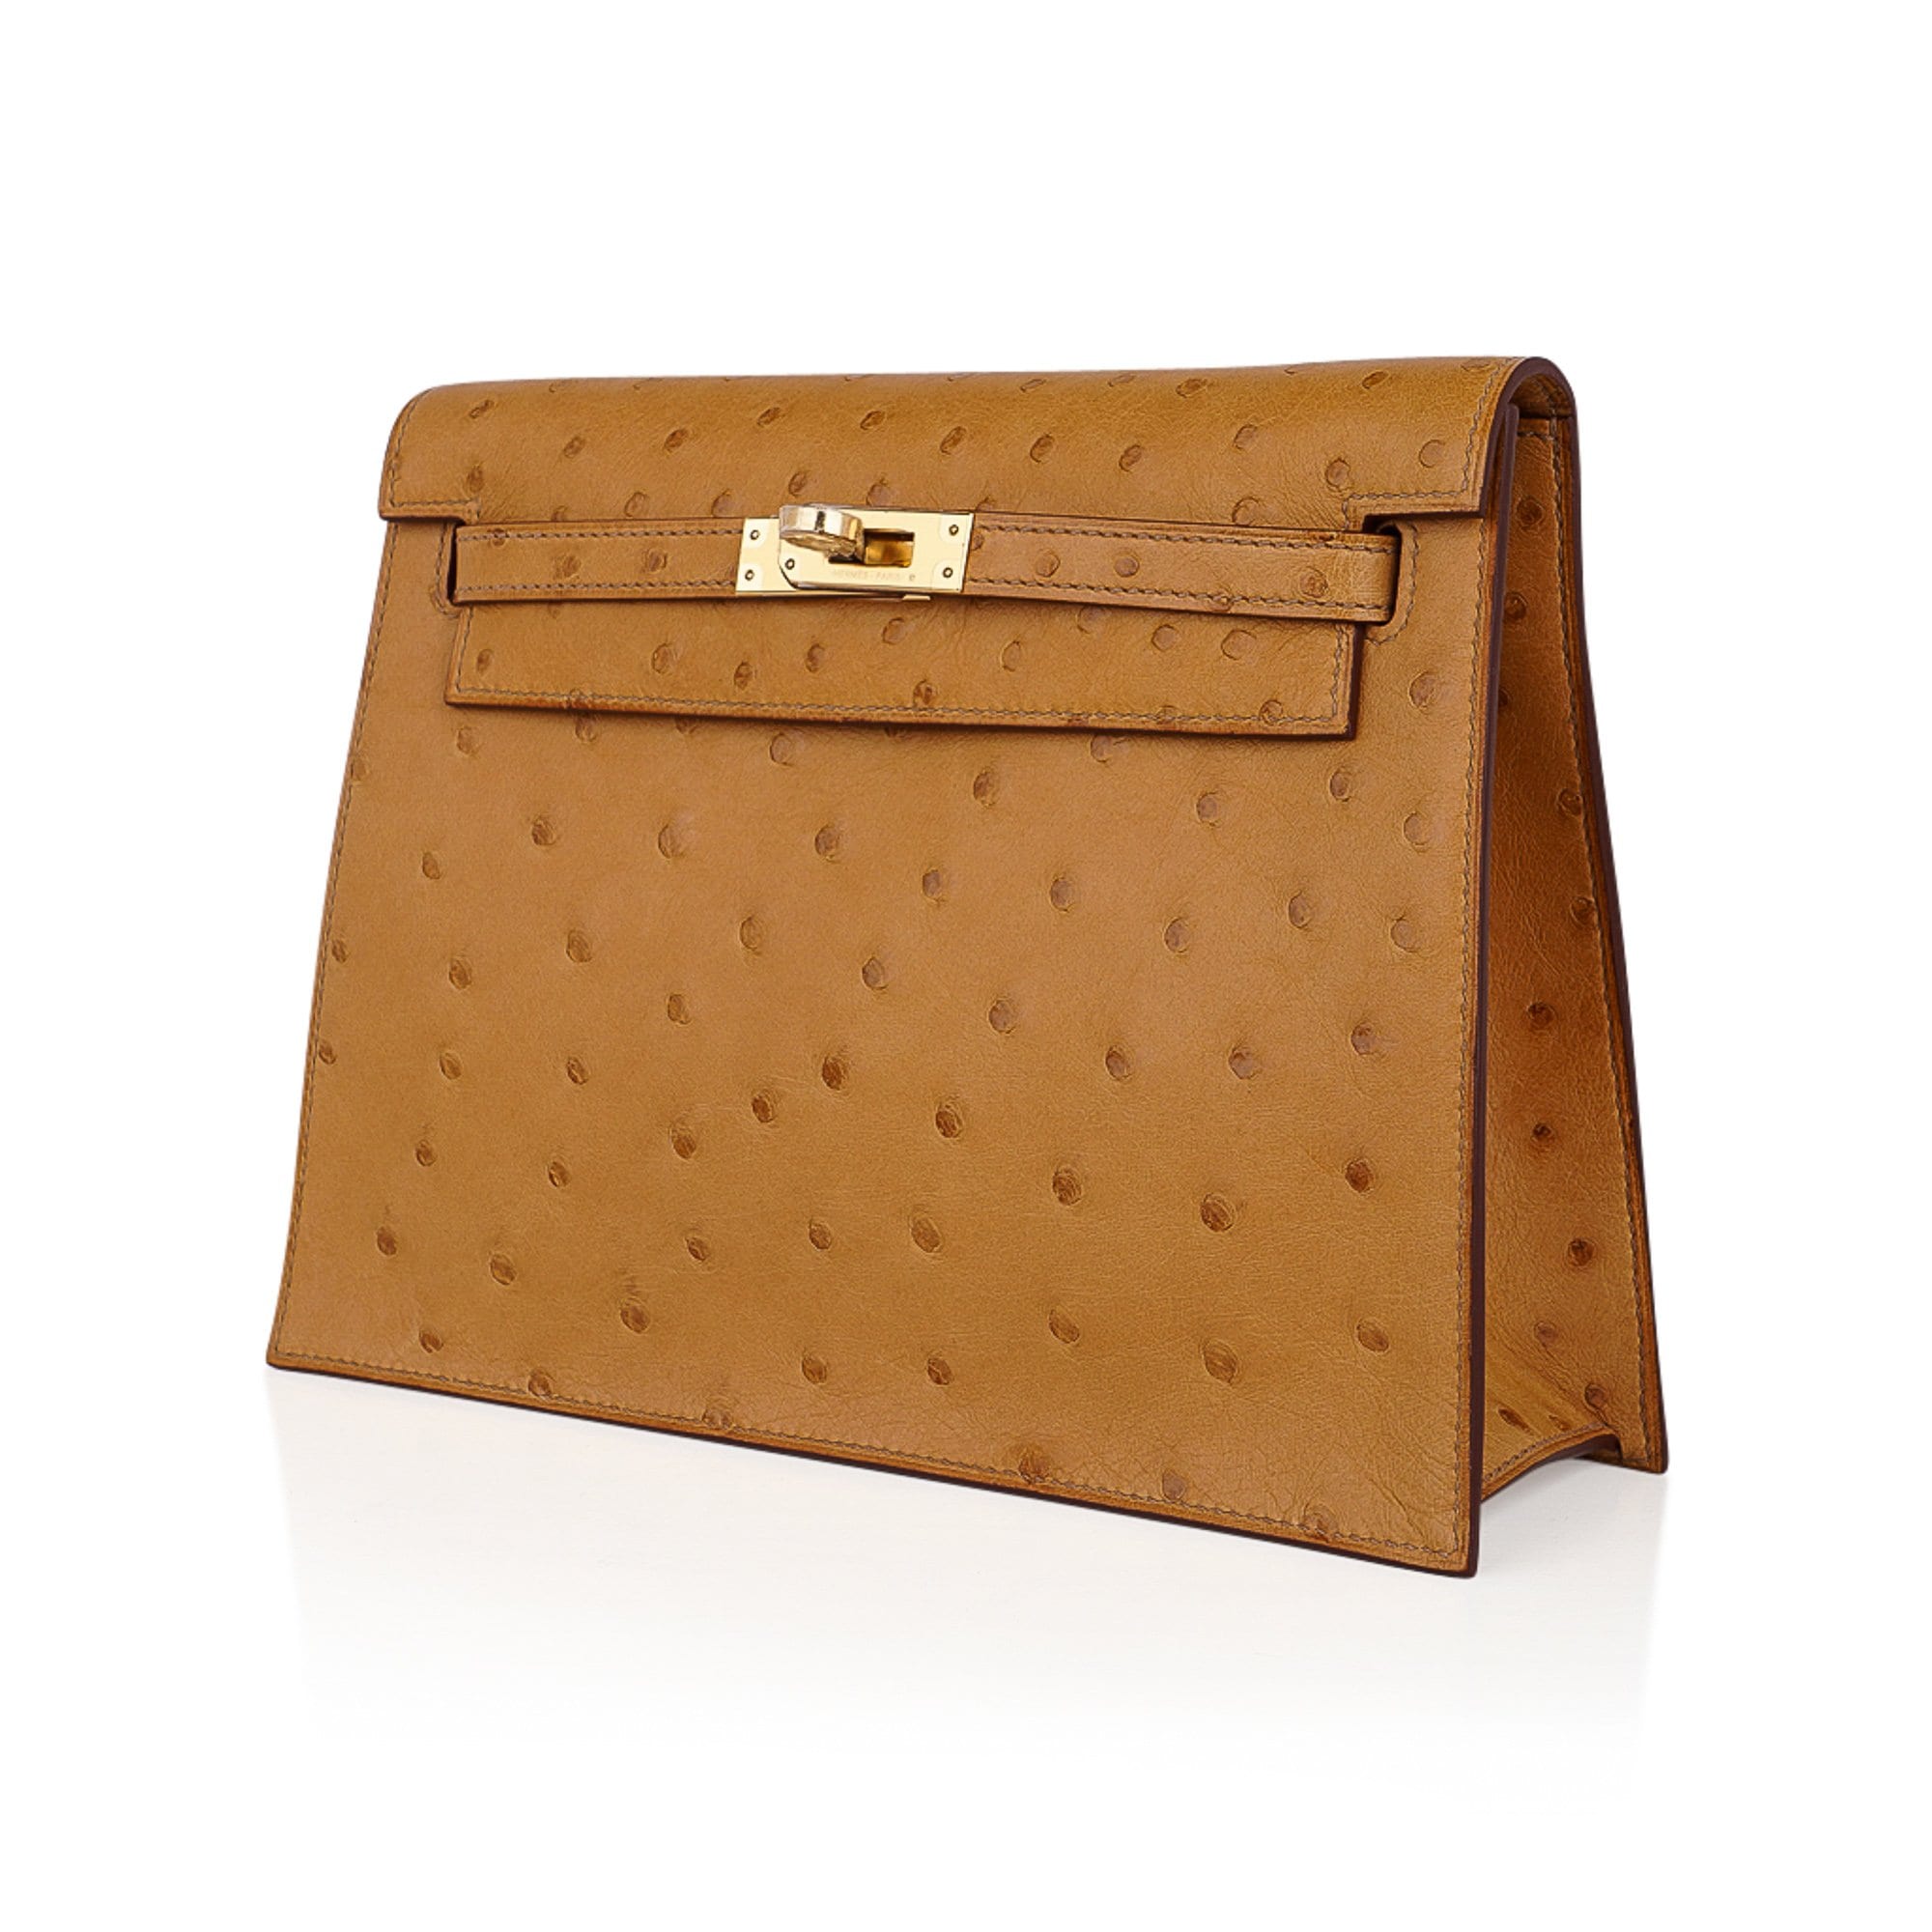 Hermes Kelly Danse Bag Tabac Camel Ostrich Gold Hardware • MIGHTYCHIC • 